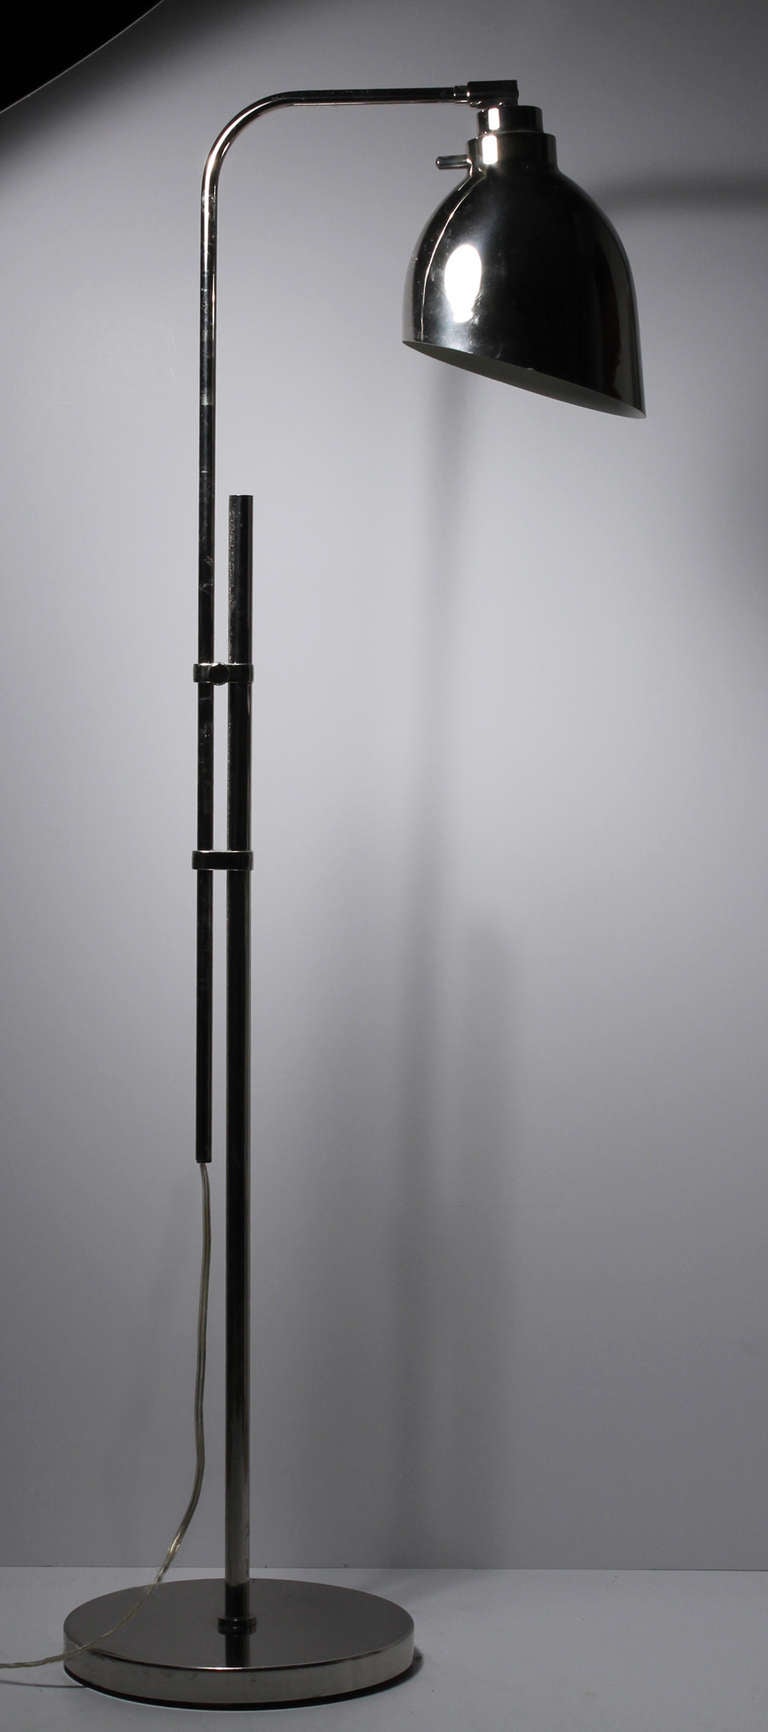 Architectural Kovacs chrome floor lamp.

Measures: Base is 10" diameter.
Height is adjustable.